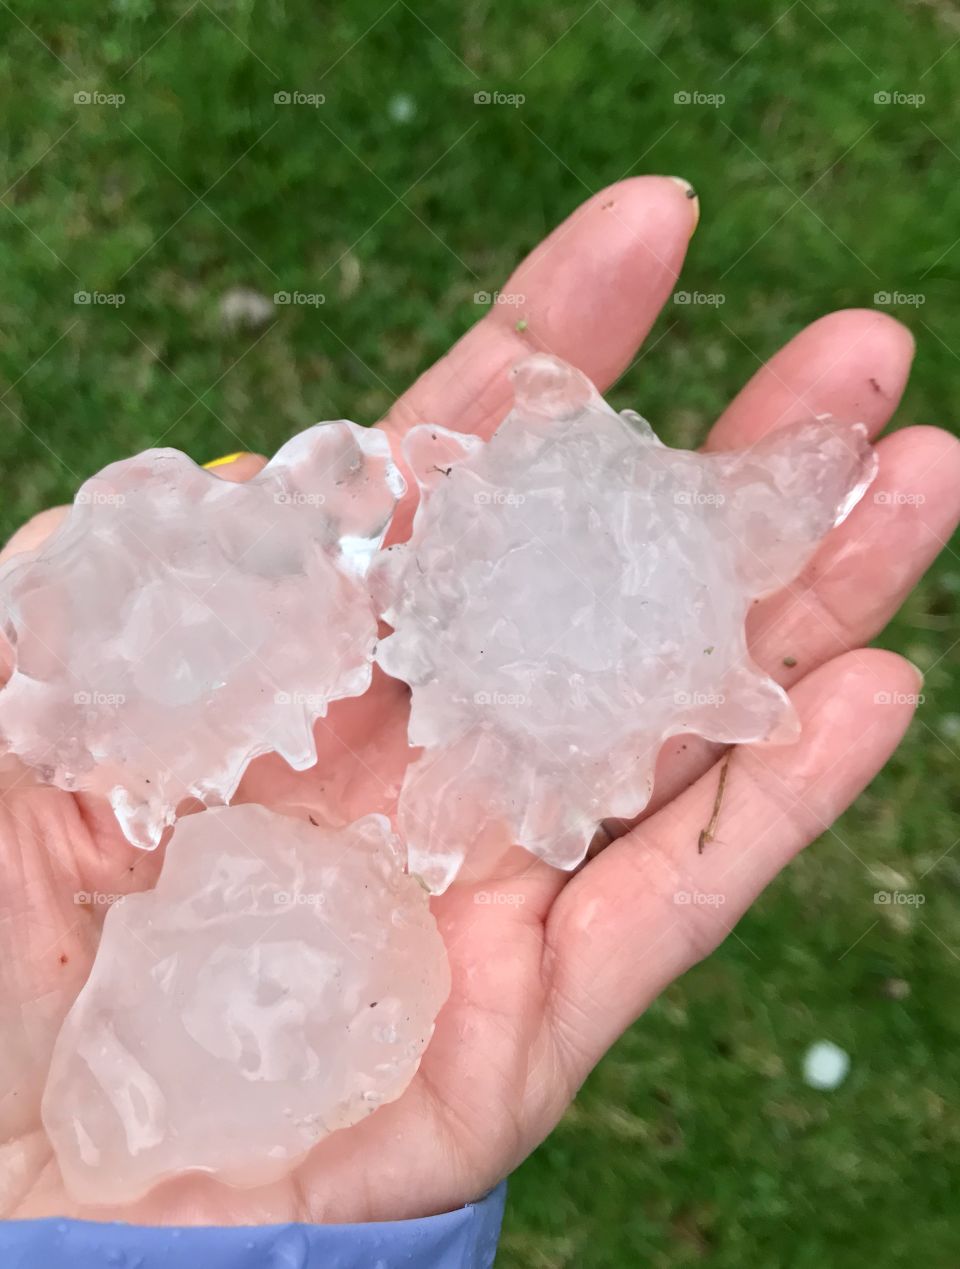  Very large hail stones from a summer rain storm